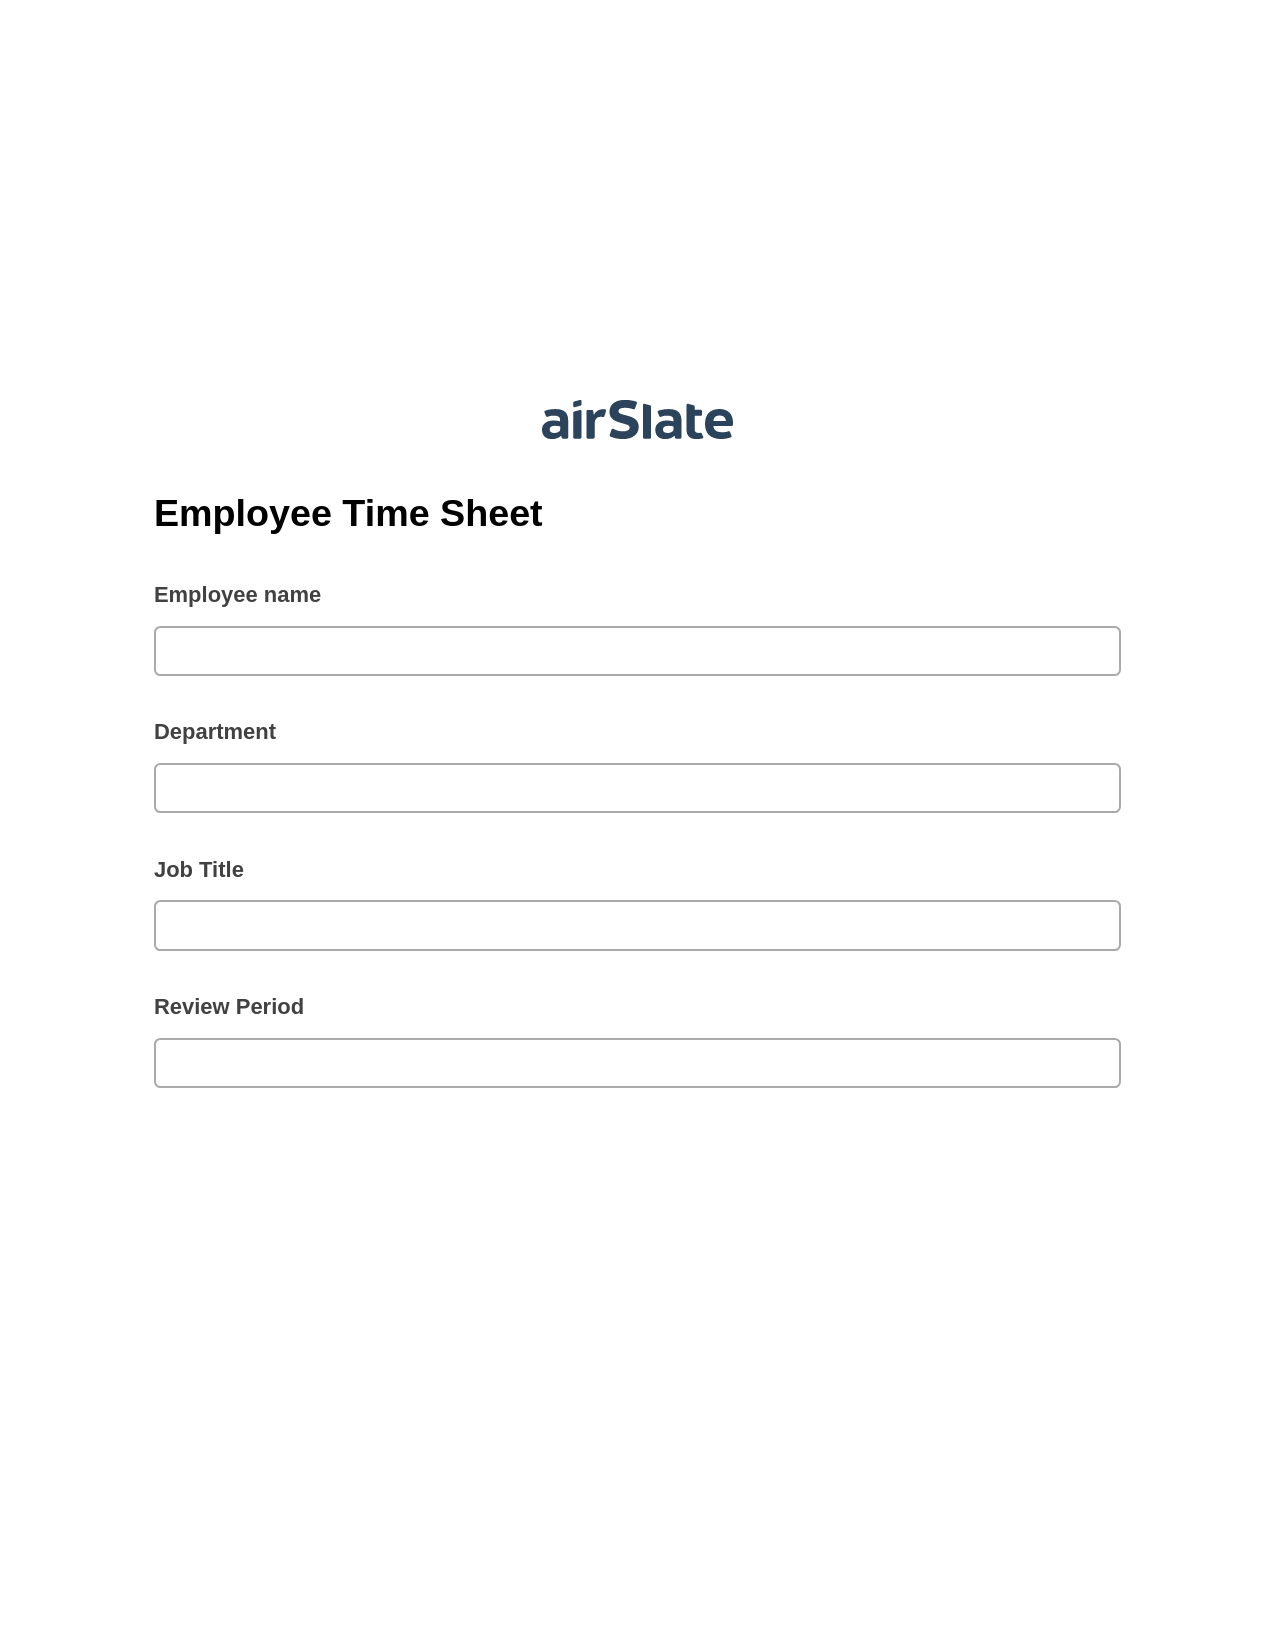 Employee Time Sheet Pre-fill from another Slate Bot, Create Salesforce Records Bot, Export to Excel 365 Bot